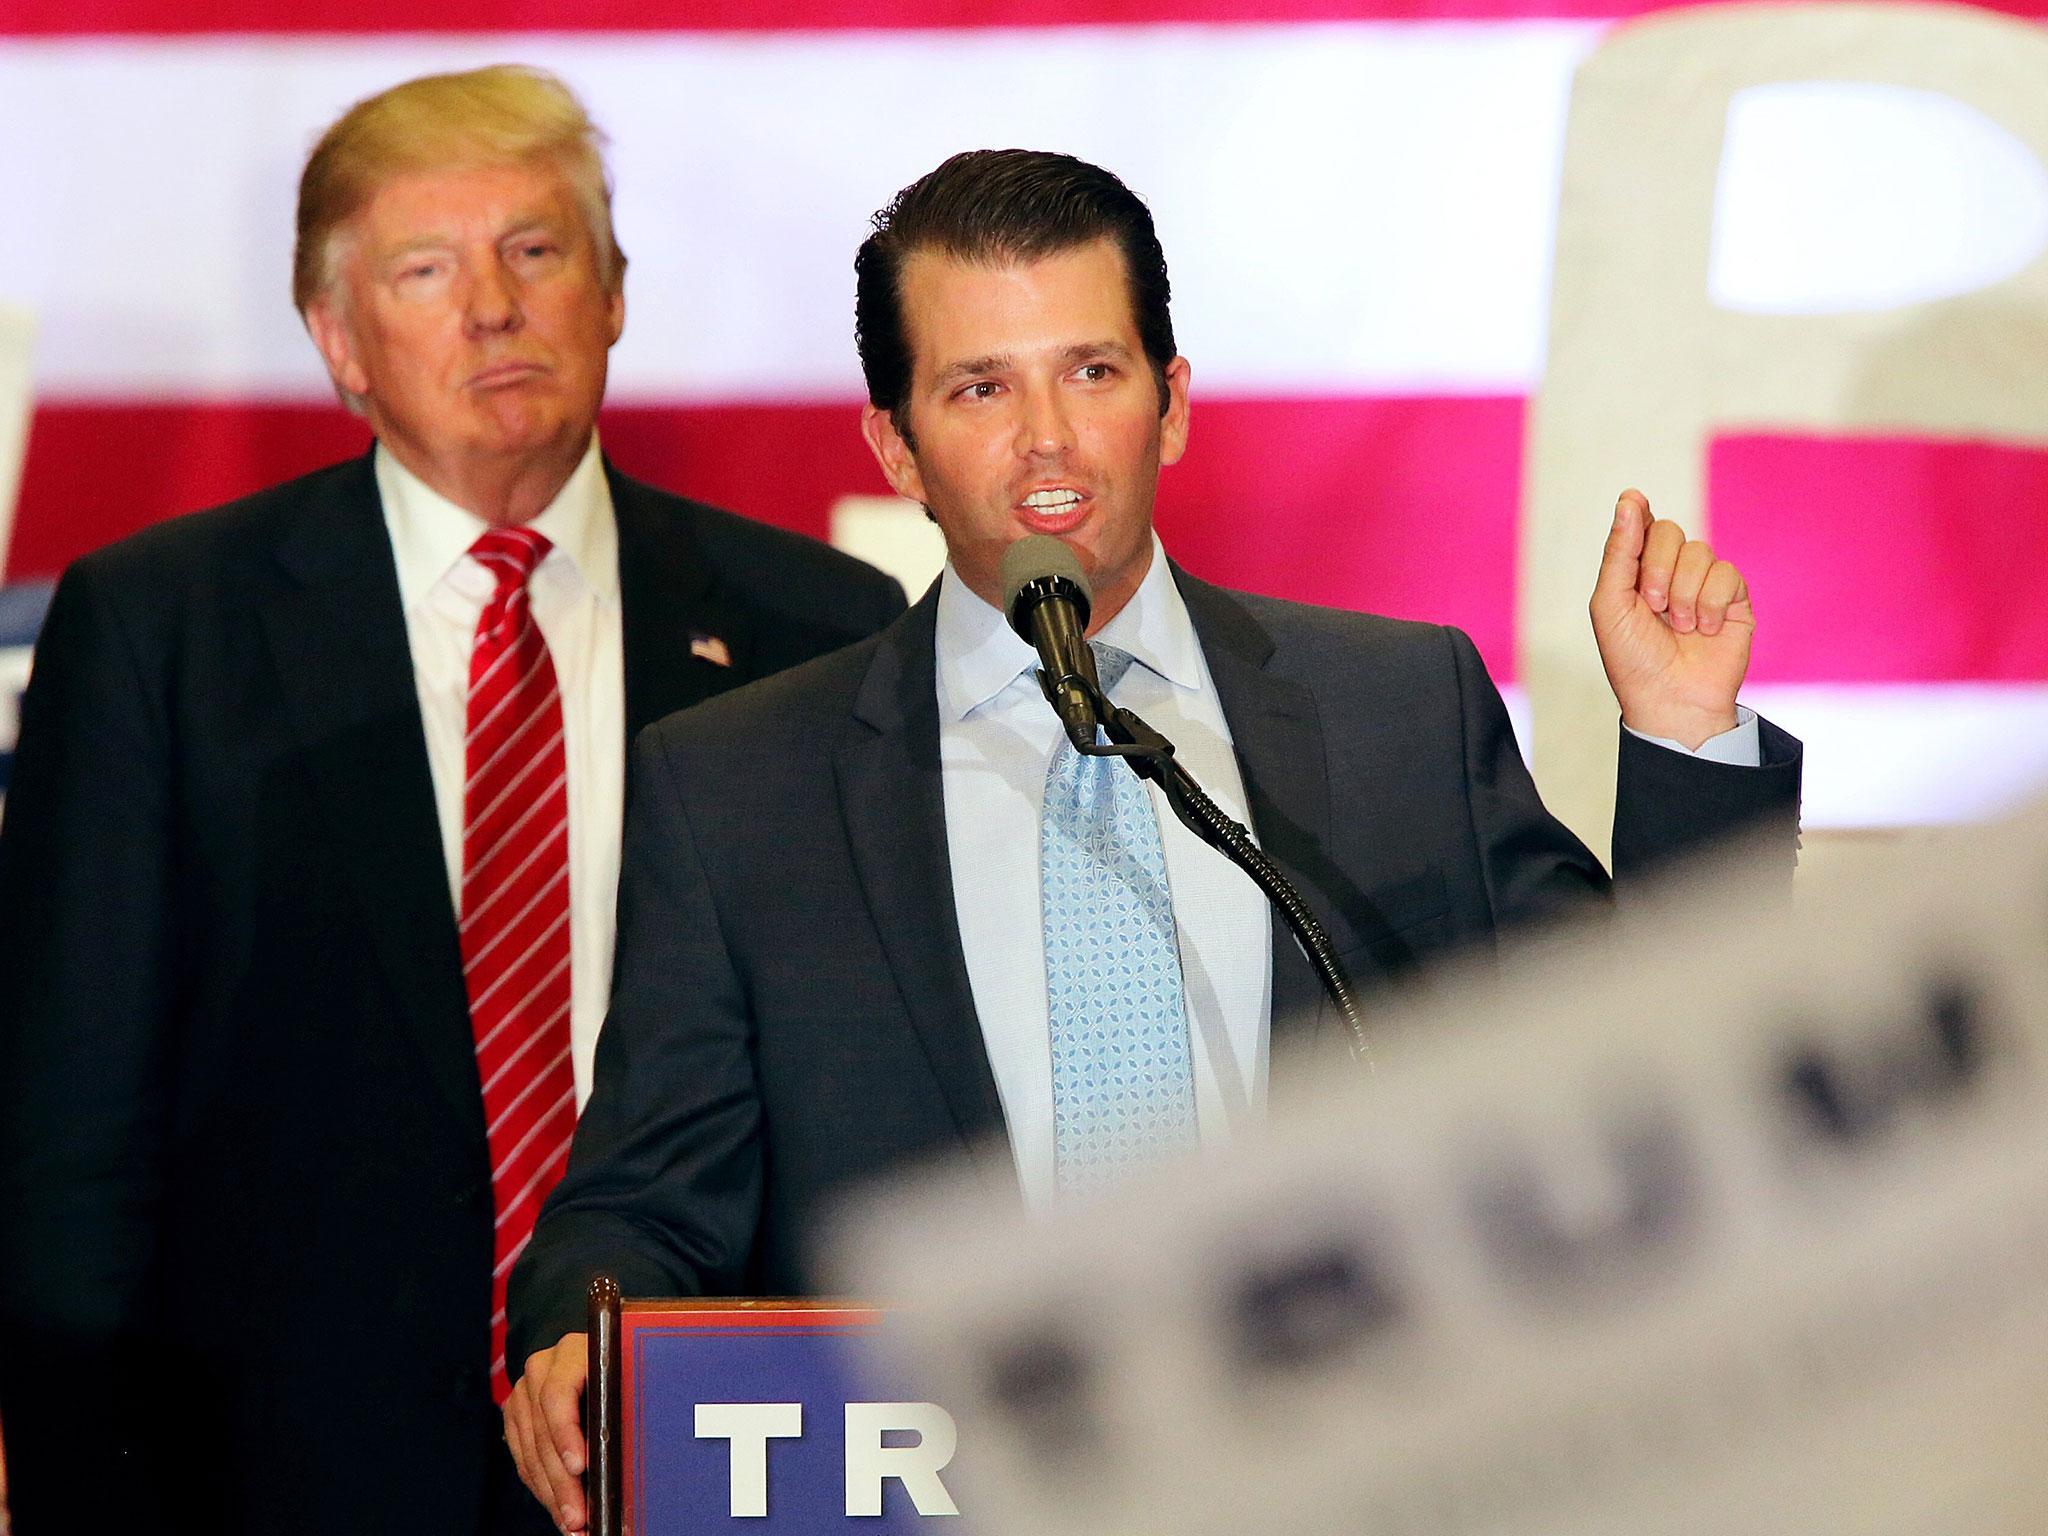 Mr Trump Jr and his lawyers have denied he did anything wrong